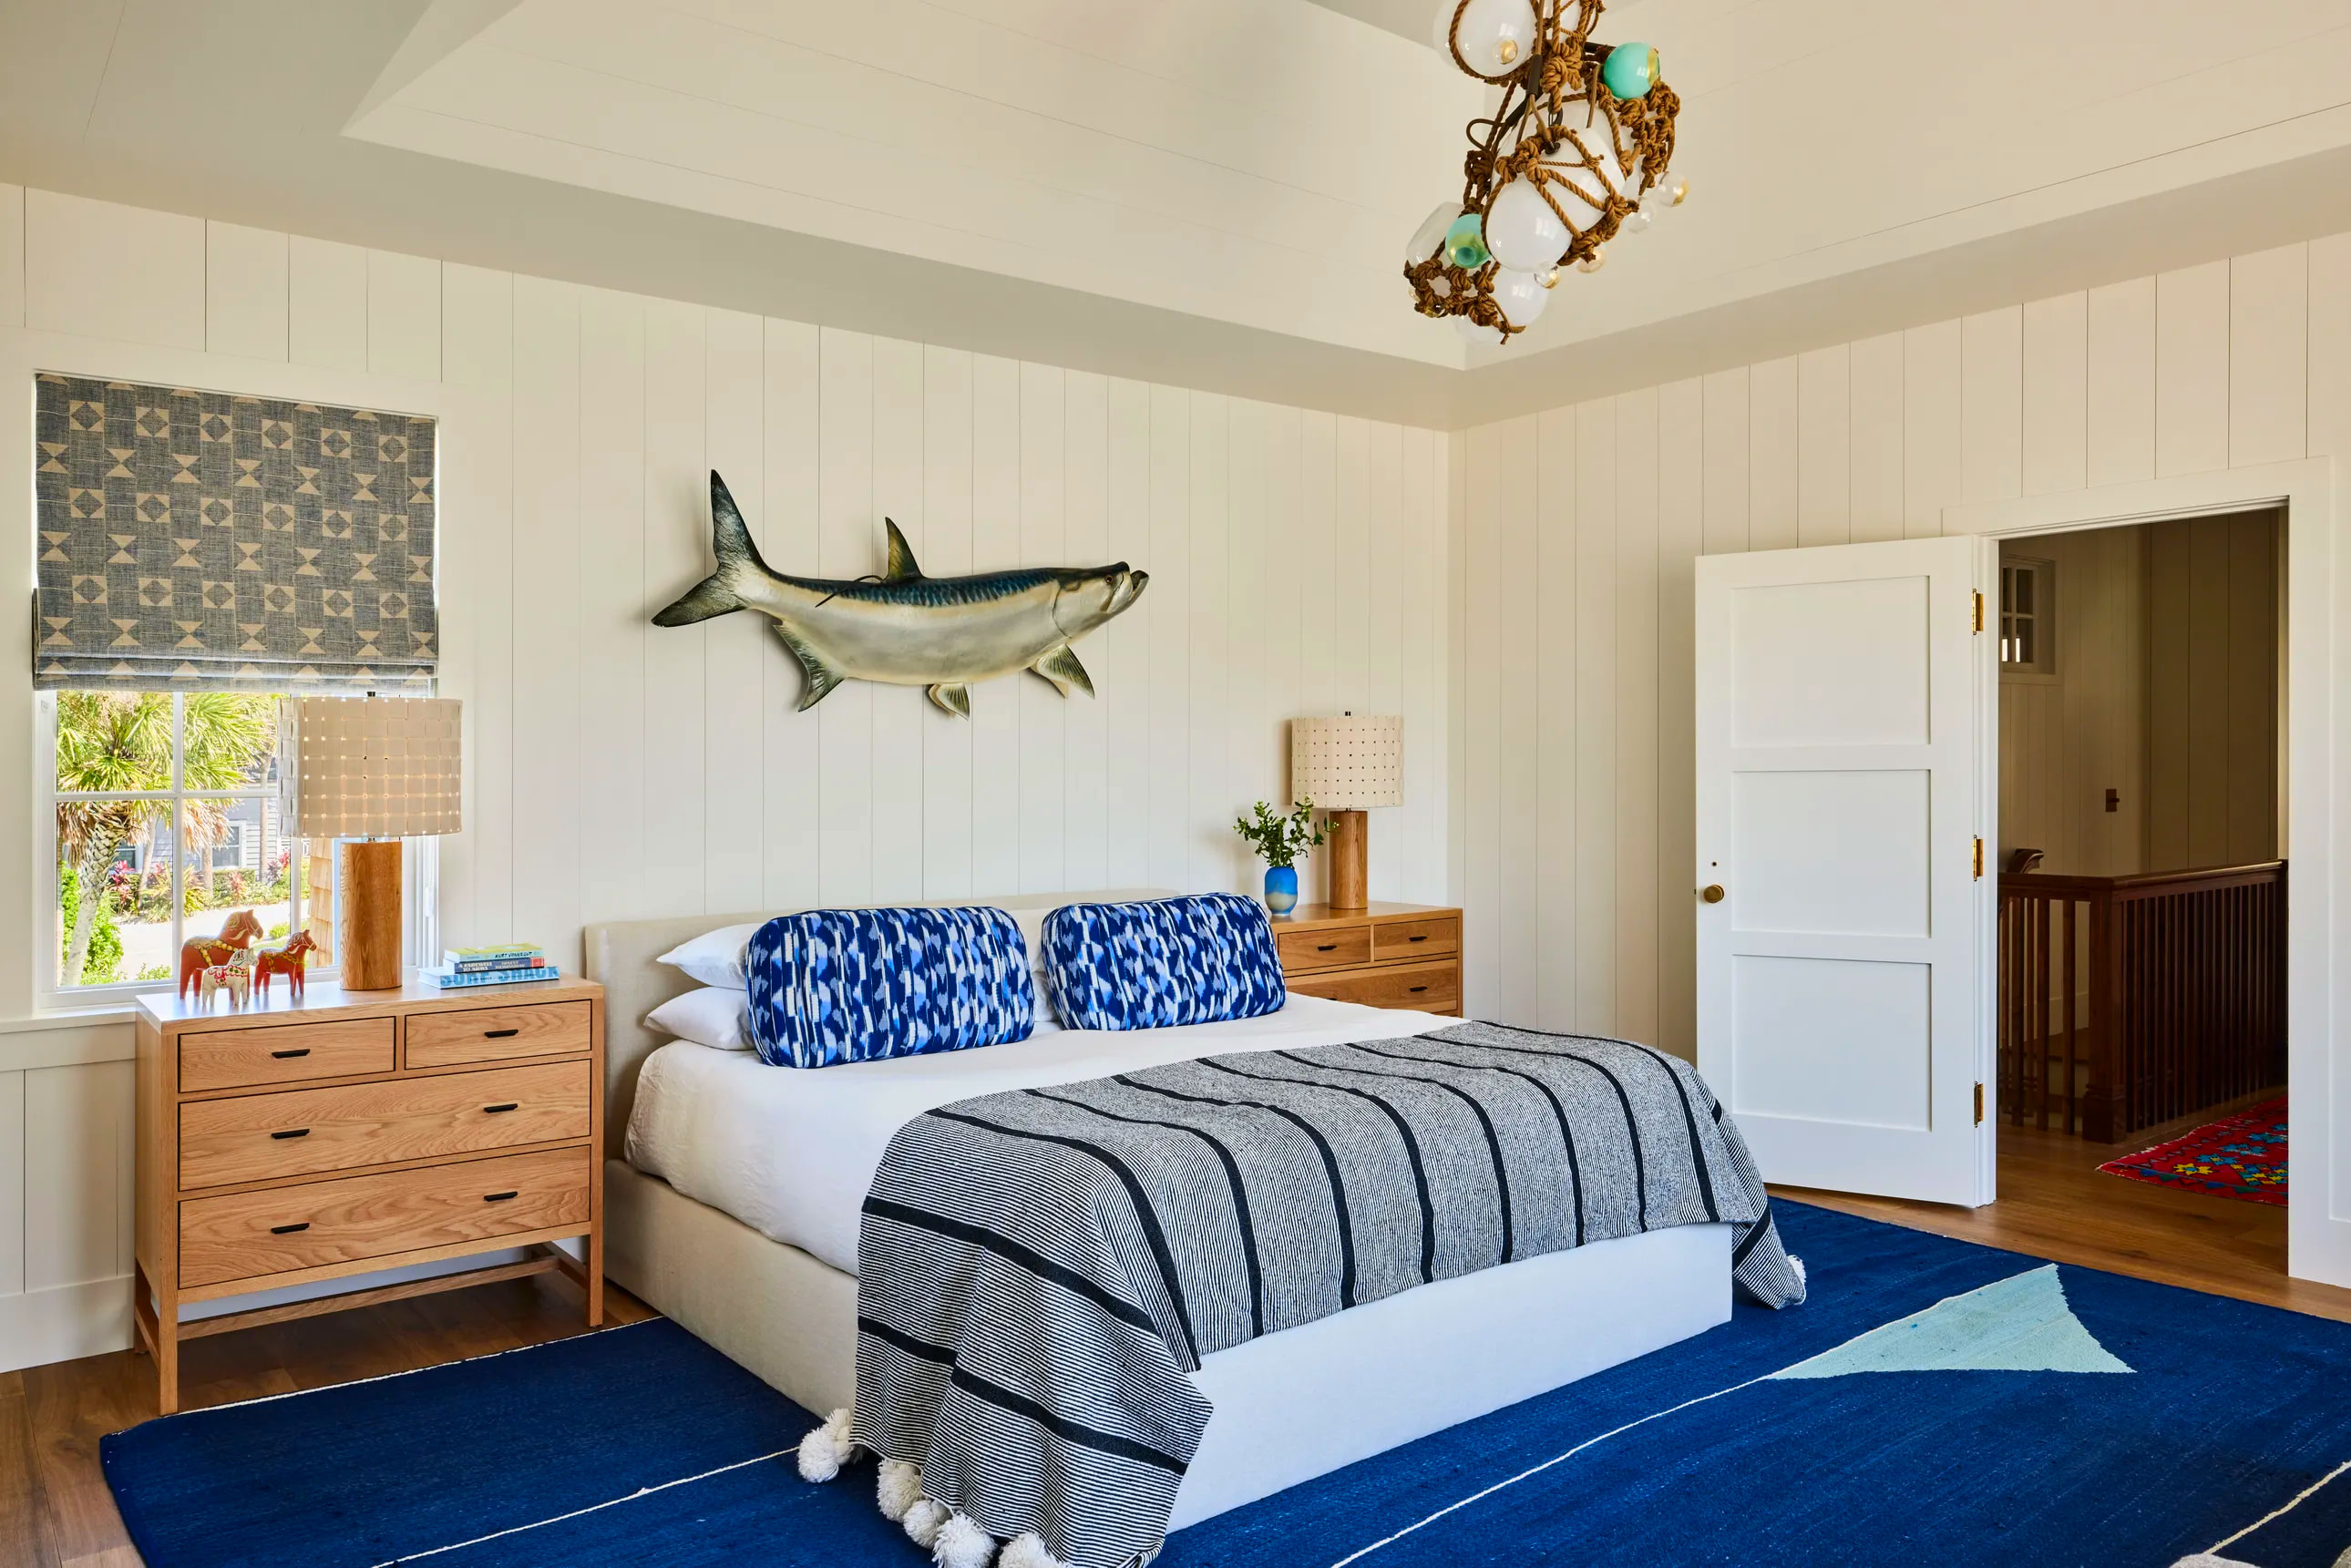 coastal bedroom with fish on the wall